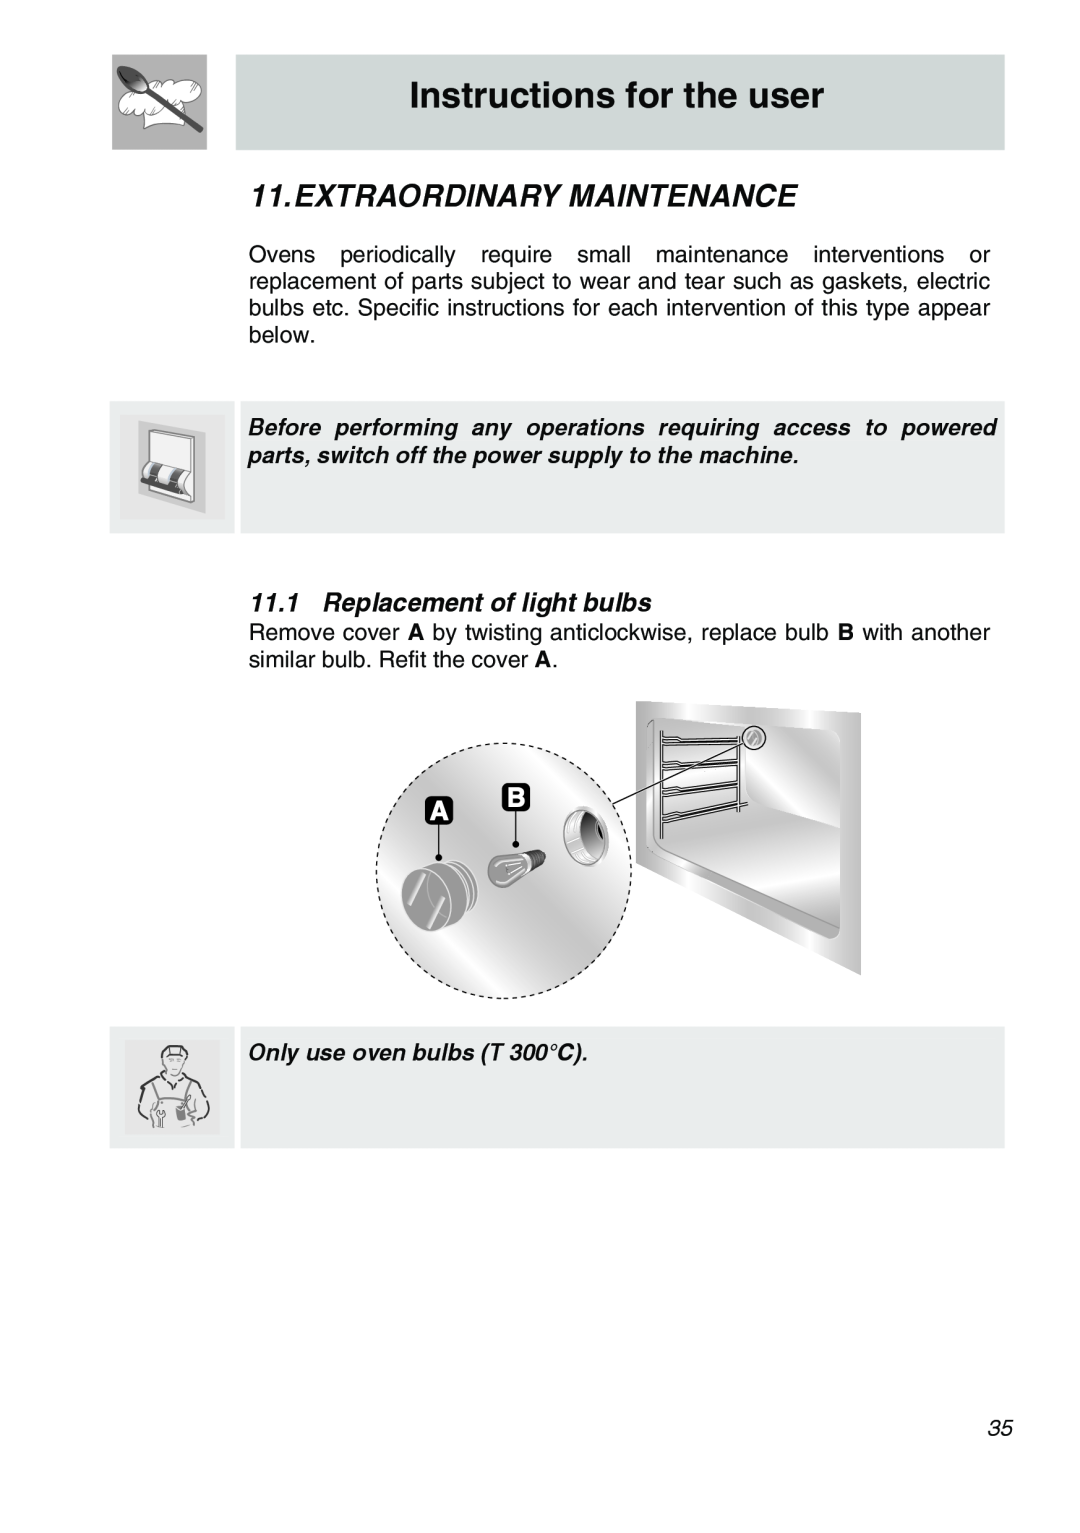 Smeg A21X-5 manual Extraordinary Maintenance, Replacement of light bulbs, Instructions for the user 